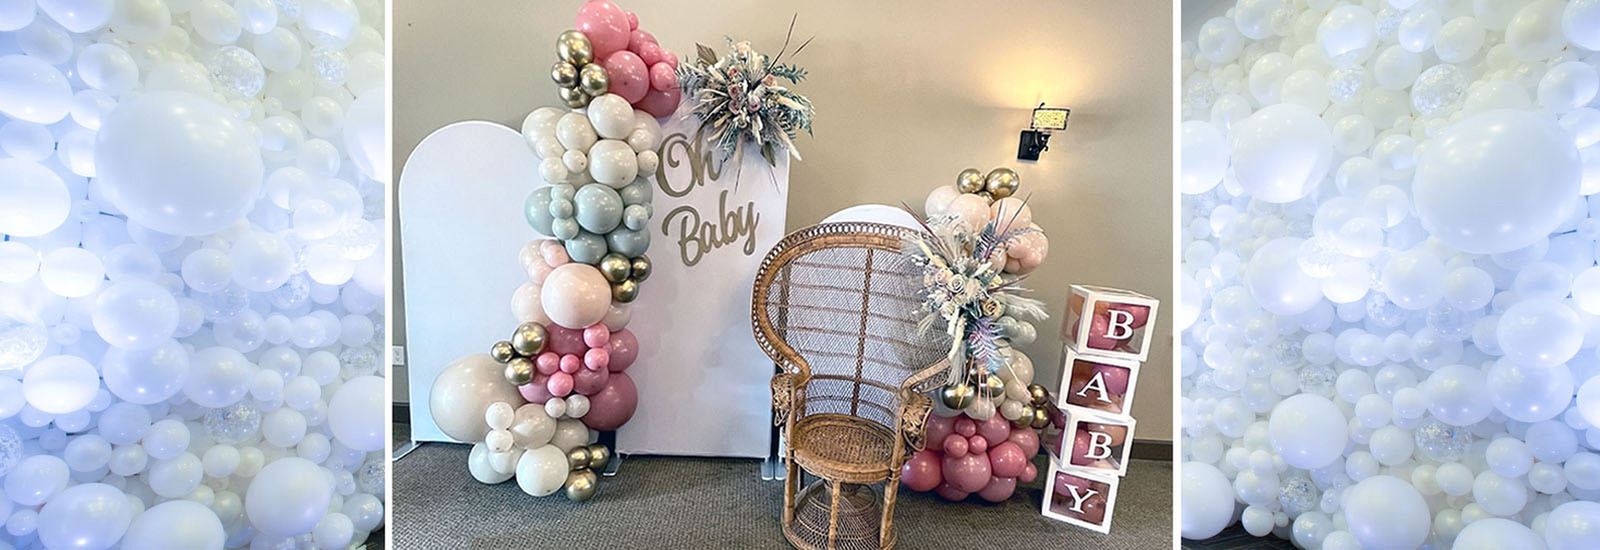 Oh Baby Boho Baby Shower backdrop with Organic Balloon Garland and Pampas Grass in Indian Harbor Beach by Blank Canvas Event Decor